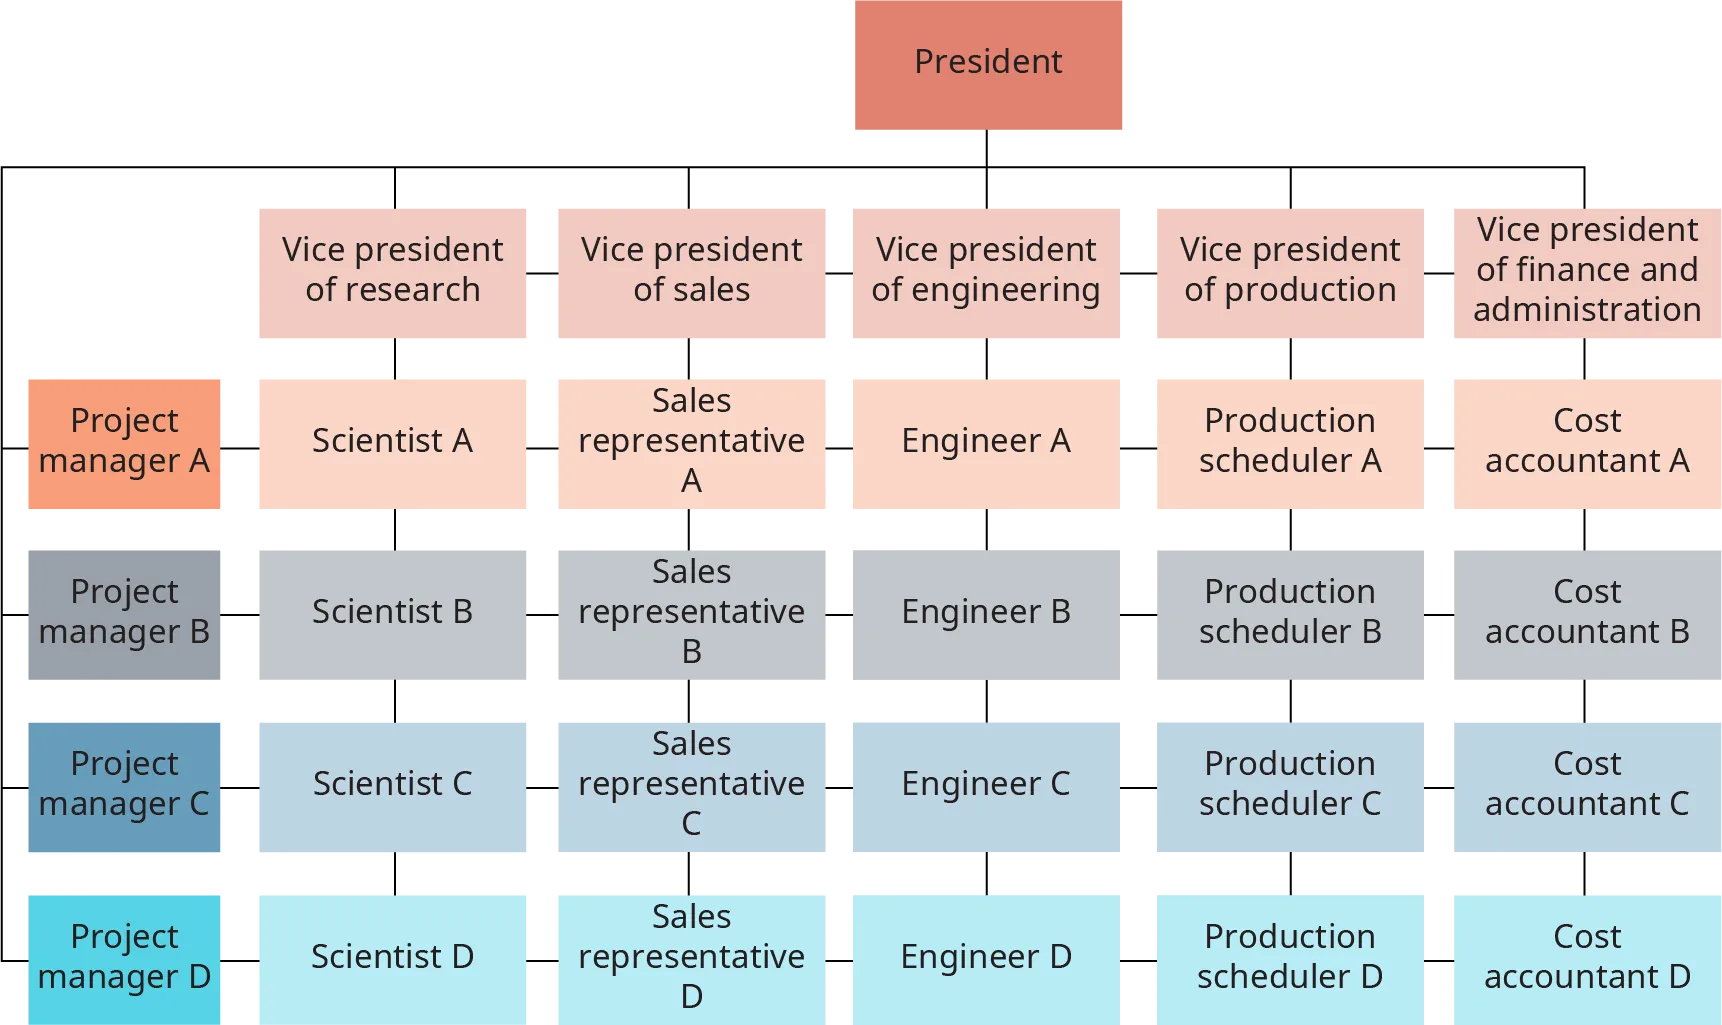 The matrix is made up of 5 columns and 4 rows. At the top of the matrix is the president; the president has lines extending to each column and row. The rows, from top to bottom, are labeled, Project manager A and Project manager B, and Project manager C, and Project manager D. From left to right, the columns are labeled Vice president of research and Vice president of sales, and Vice president of engineering, and Vice president of production, and Vice president of finance and administration. From left to right, the cells in the first row read, Scientist A, and Sales Representative A, and Engineer A, and Production Scheduler A, and Cost accountant A. Each row has this same construction, with scientist under v p of research; and sales rep under v p of sales, and engineer under v p of engineering, and production scheduler under v p of production, and cost accountant under v p of finance and admin.